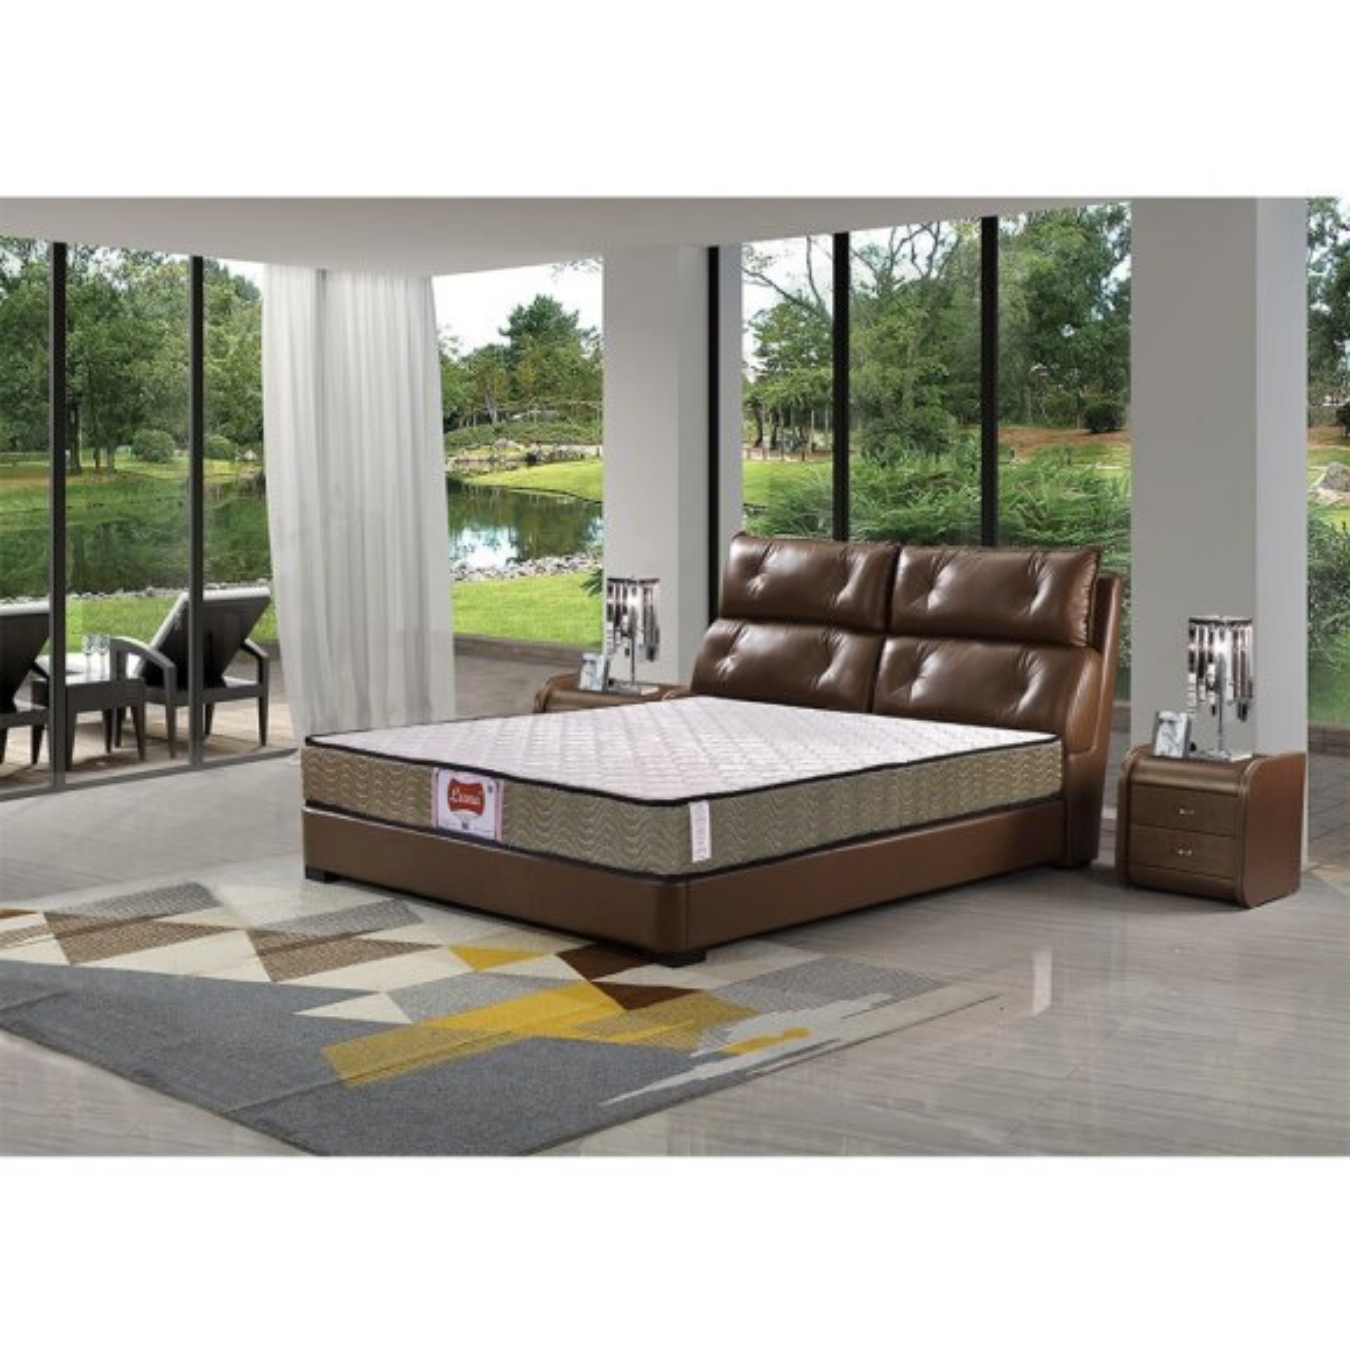 Luna 138 Bonnel Spring Box - Double  bring for you an amazing comfort in your sleeping times. 